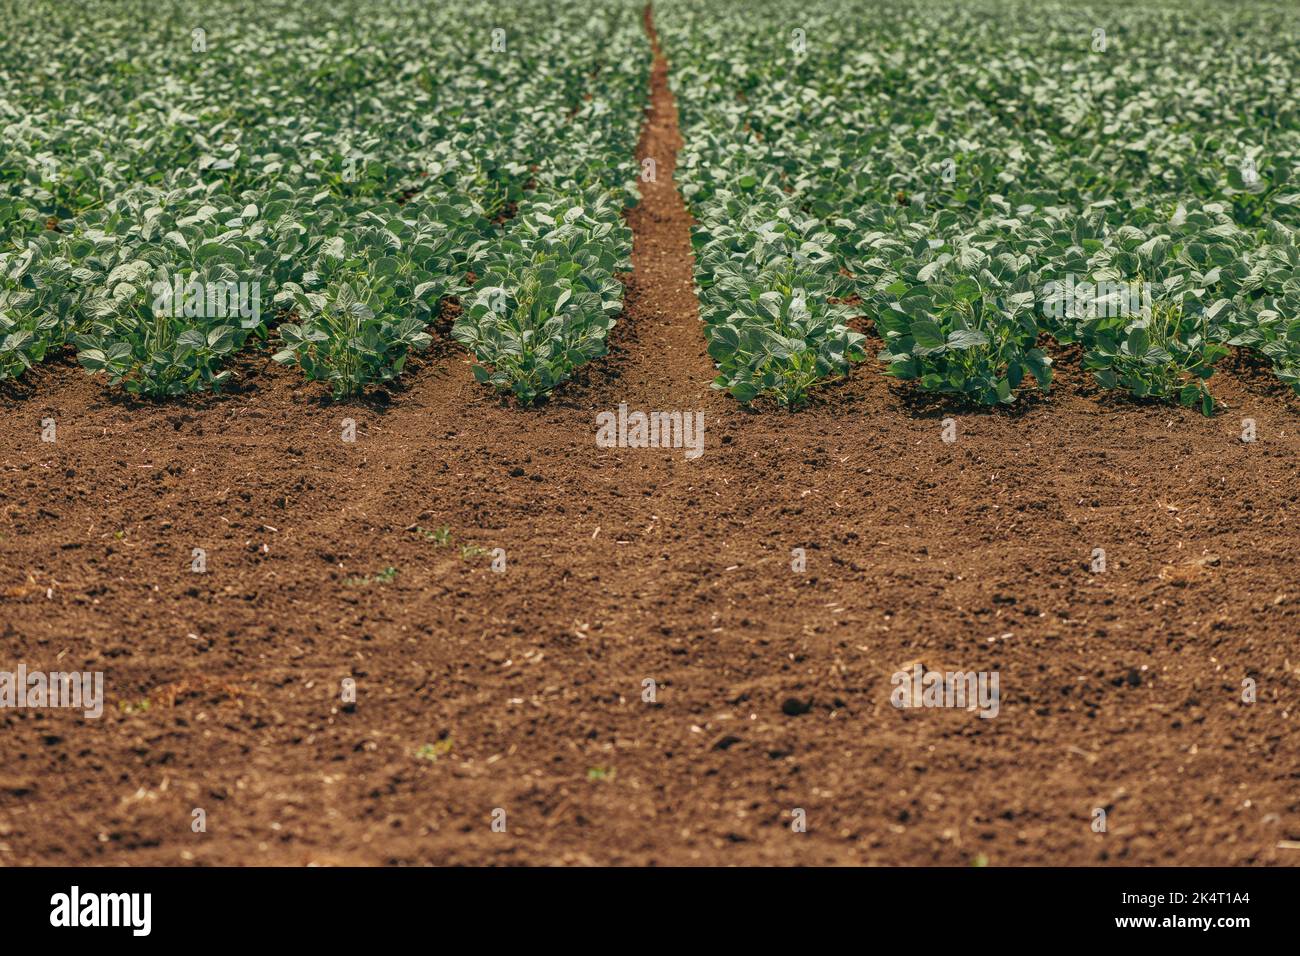 Soybean crops (Glycine max) in cultivated agricultural field in diminishing perspective, selective focus Stock Photo